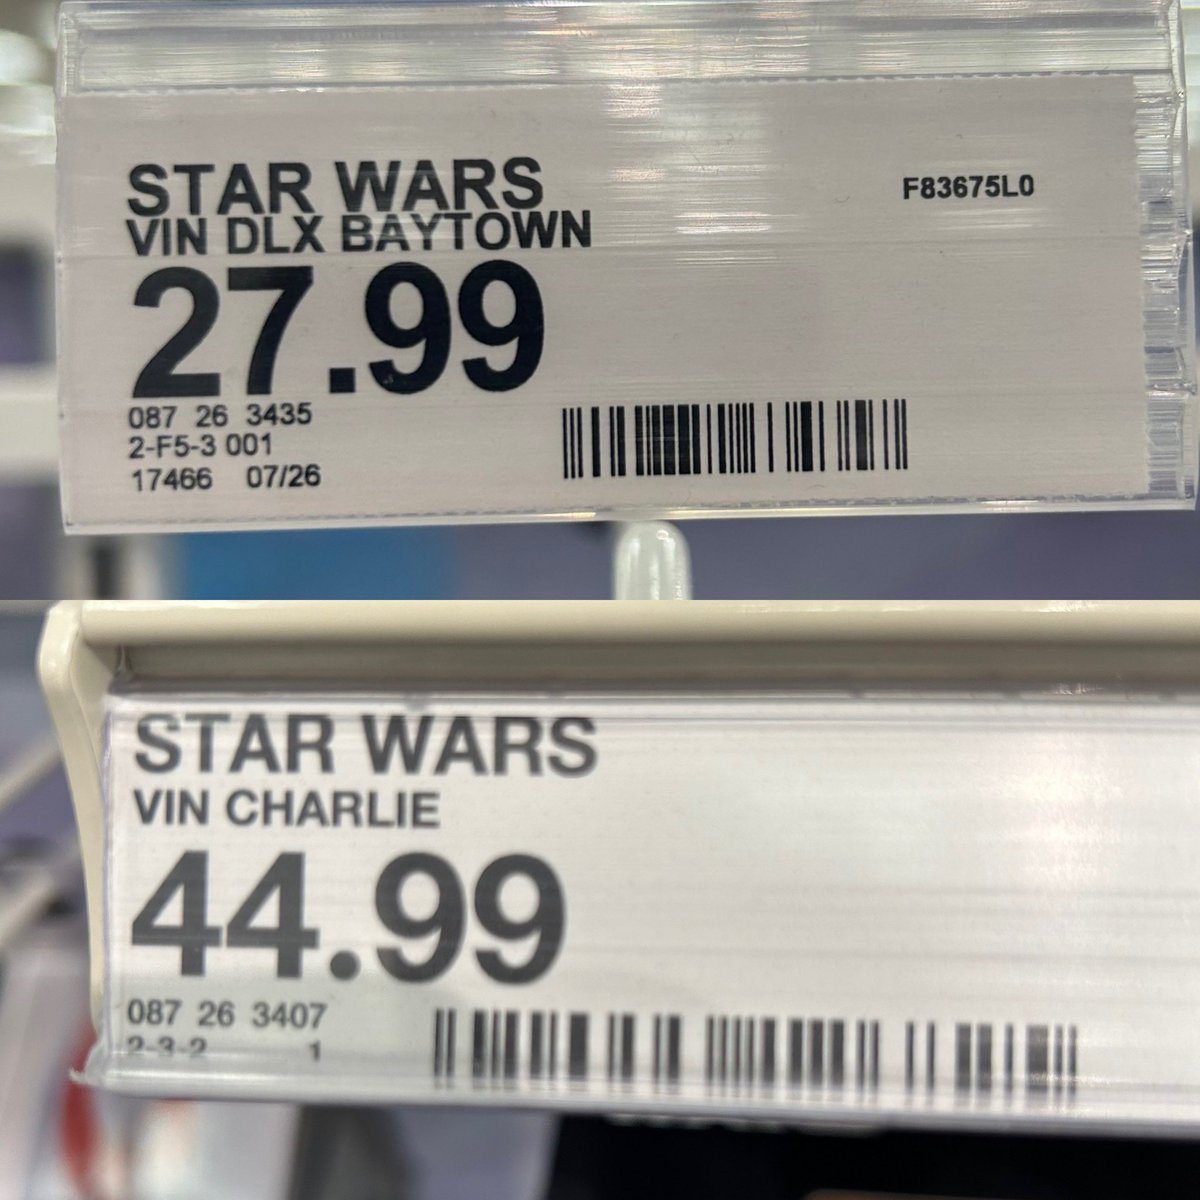 Local Target has placed shelf tags for the Deluxe TVC Krrsantan and the Speeder Bike with Scout Trooper and Grogu from The Mandalorian #hasbro #vintagecollection #kenner #starwars #target #thebookofbobafett #themandalorian https://t.co/kh808bceff